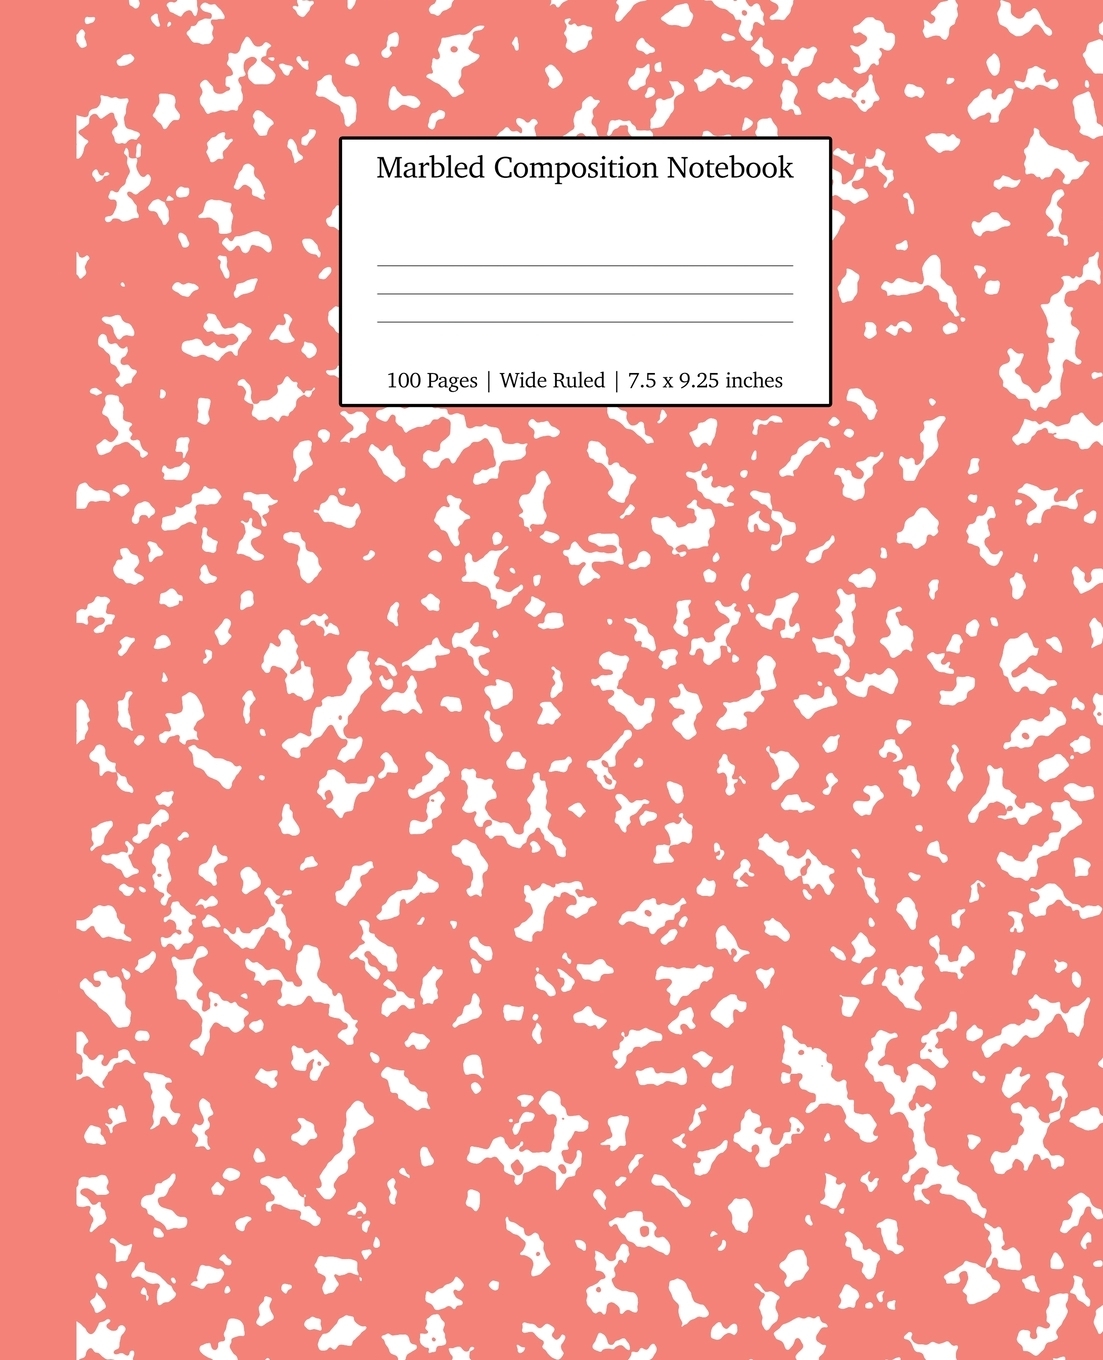 фото Marbled Composition Notebook. Coral Pink Marble Wide Ruled Paper Subject Book